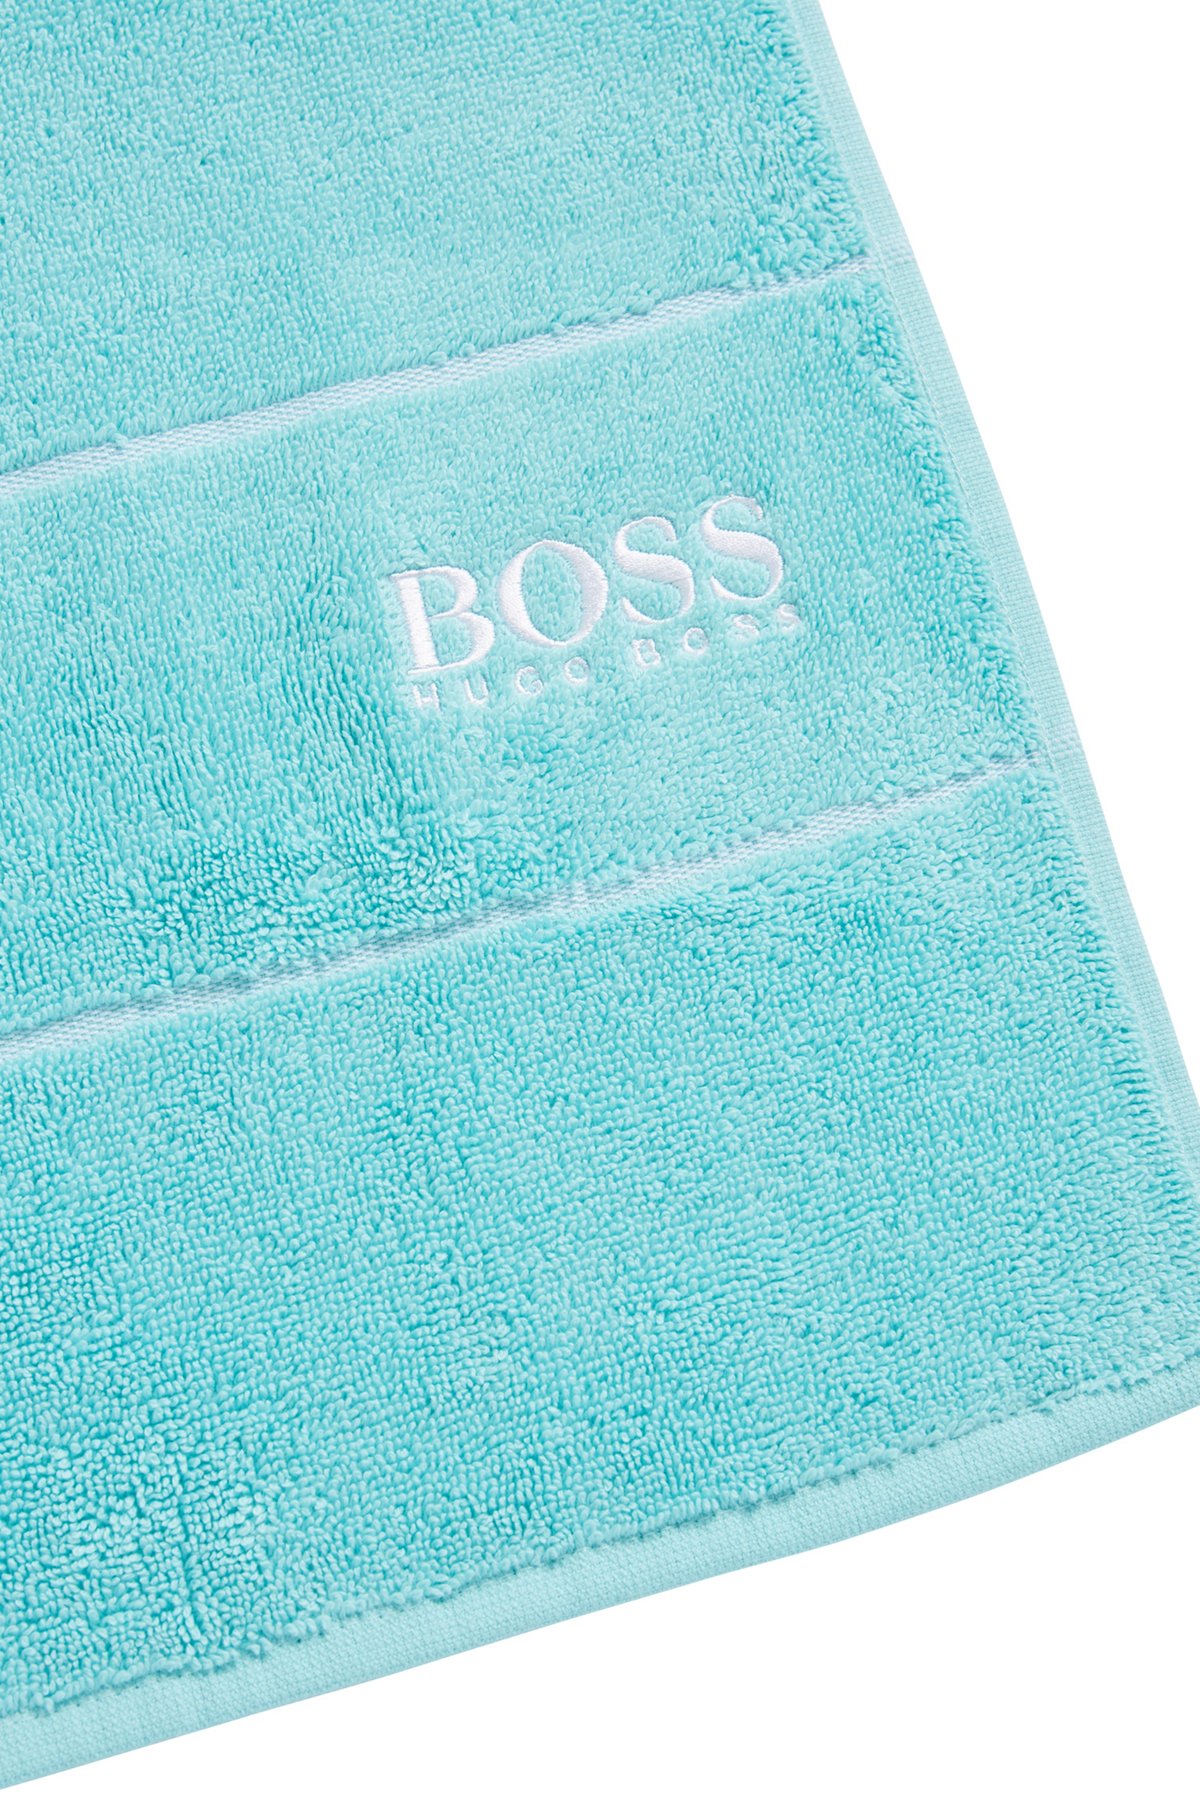 Cotton bath sheet with white logo embroidery, Turquoise